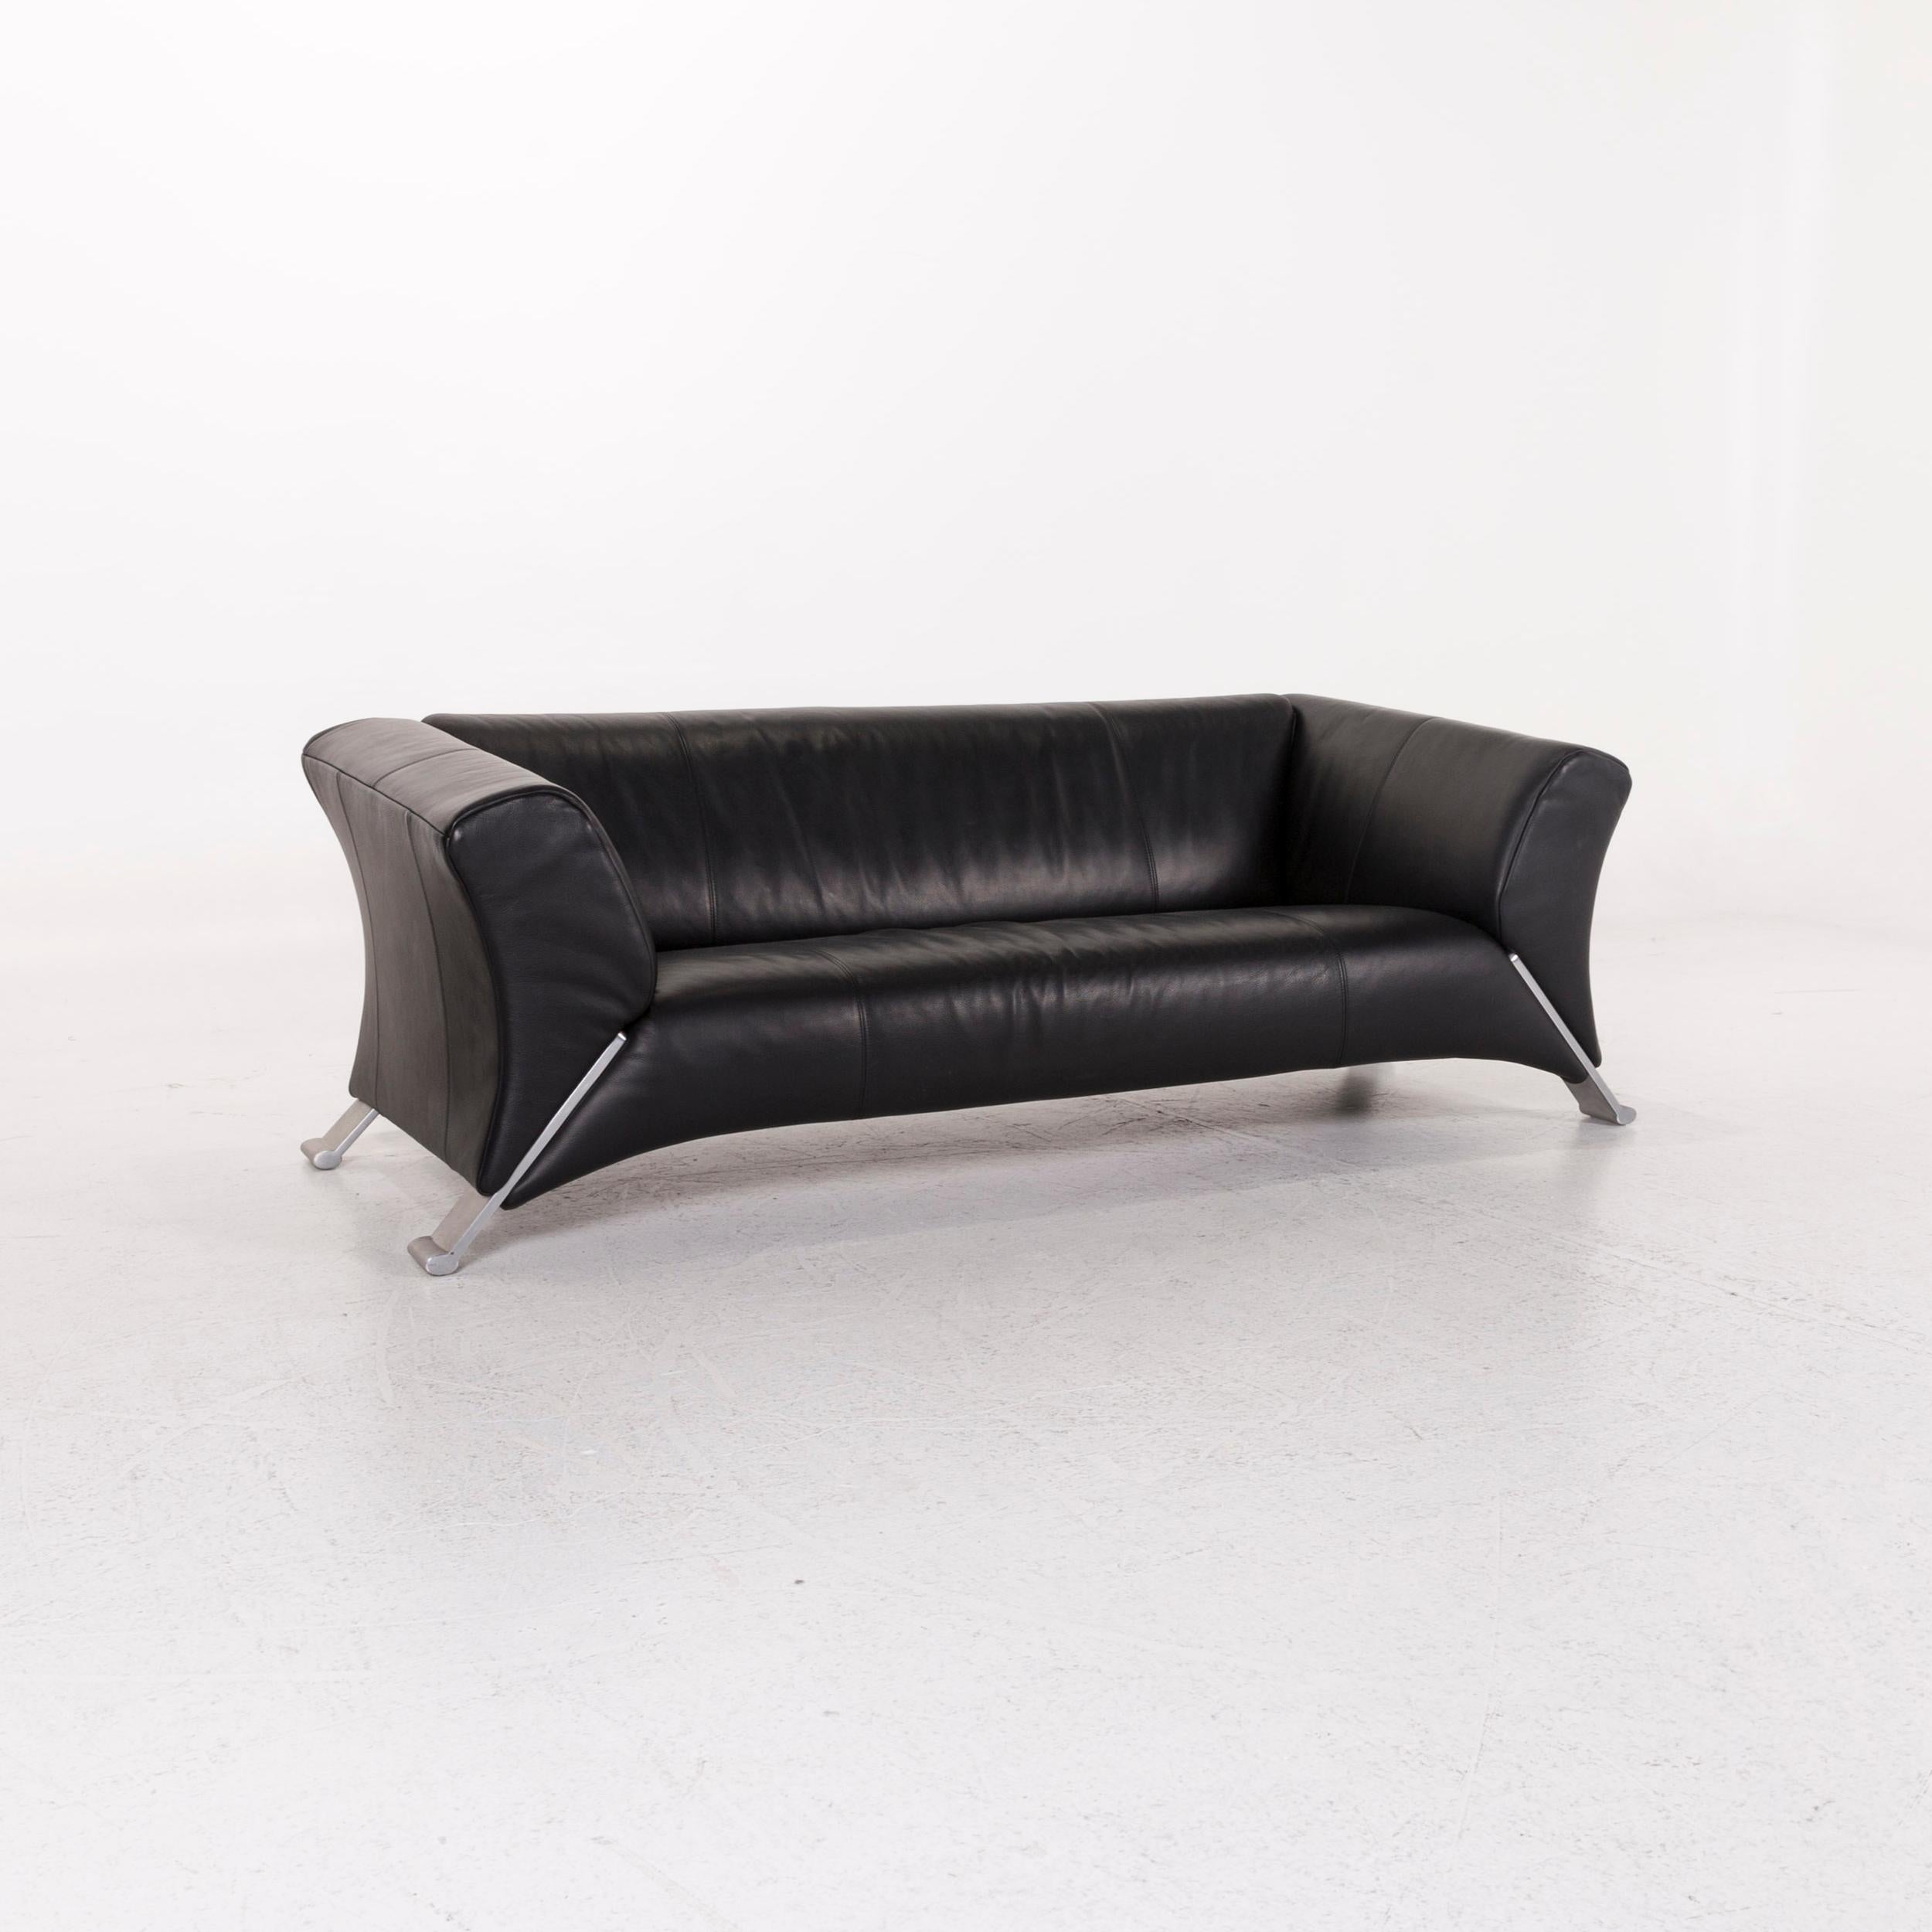 We bring to you a Rolf Benz 322 leather sofa black three-seat couch.


 Product measurements in centimeters:
 

Depth 92
Width 209
Height 72
Seat-height 41
Rest-height 69
Seat-depth 59
Seat-width 140
Back-height 37.
 